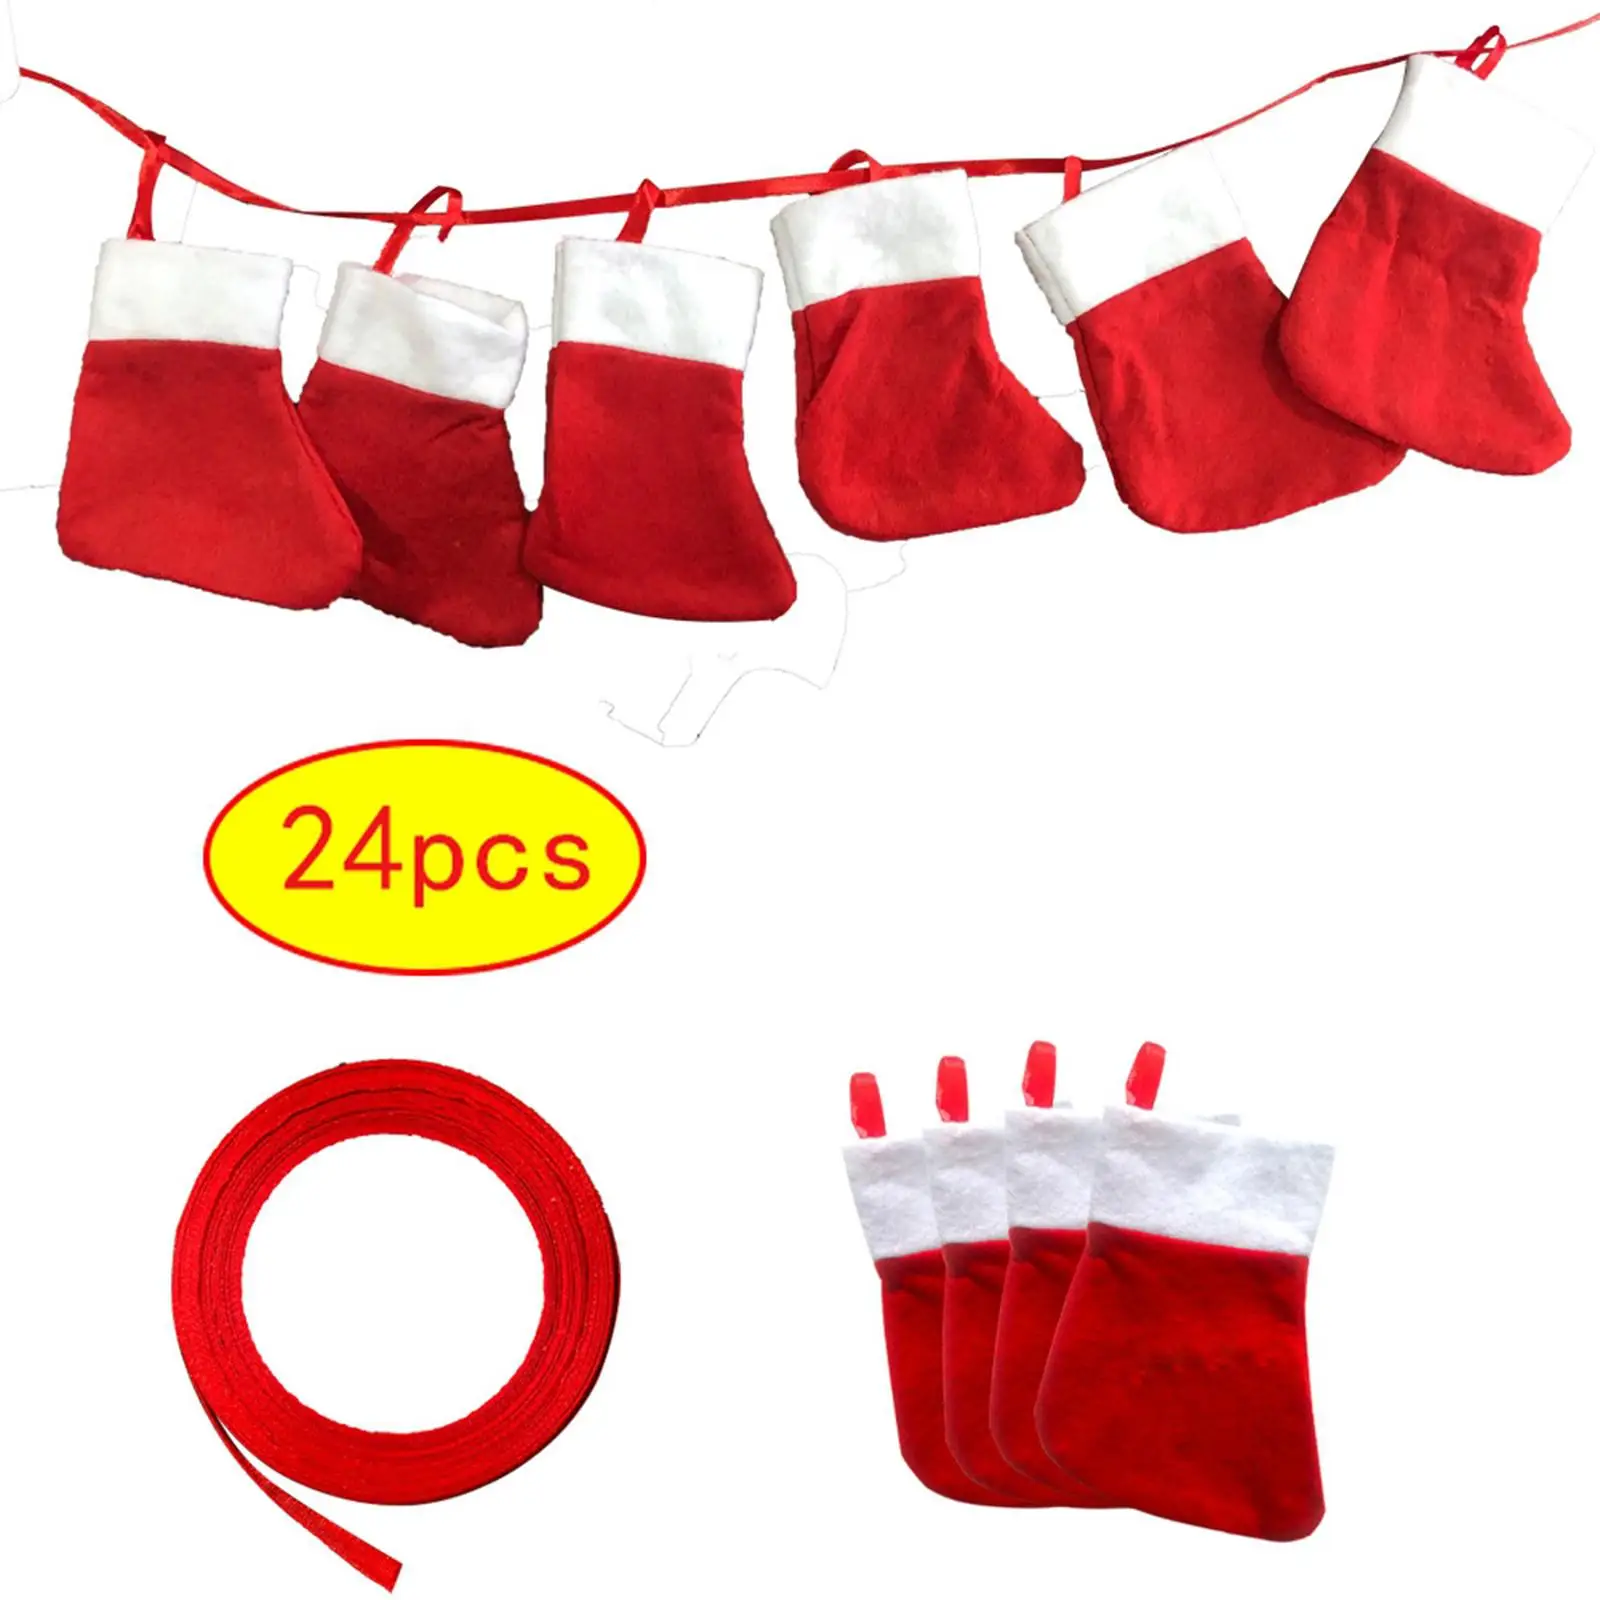 24Pcs Advent Calendar Bags Decorative 22M Ribbons with Stickers DIY Christmas Gift Bags Socks for Kids Adult Wall Hanging Xmas